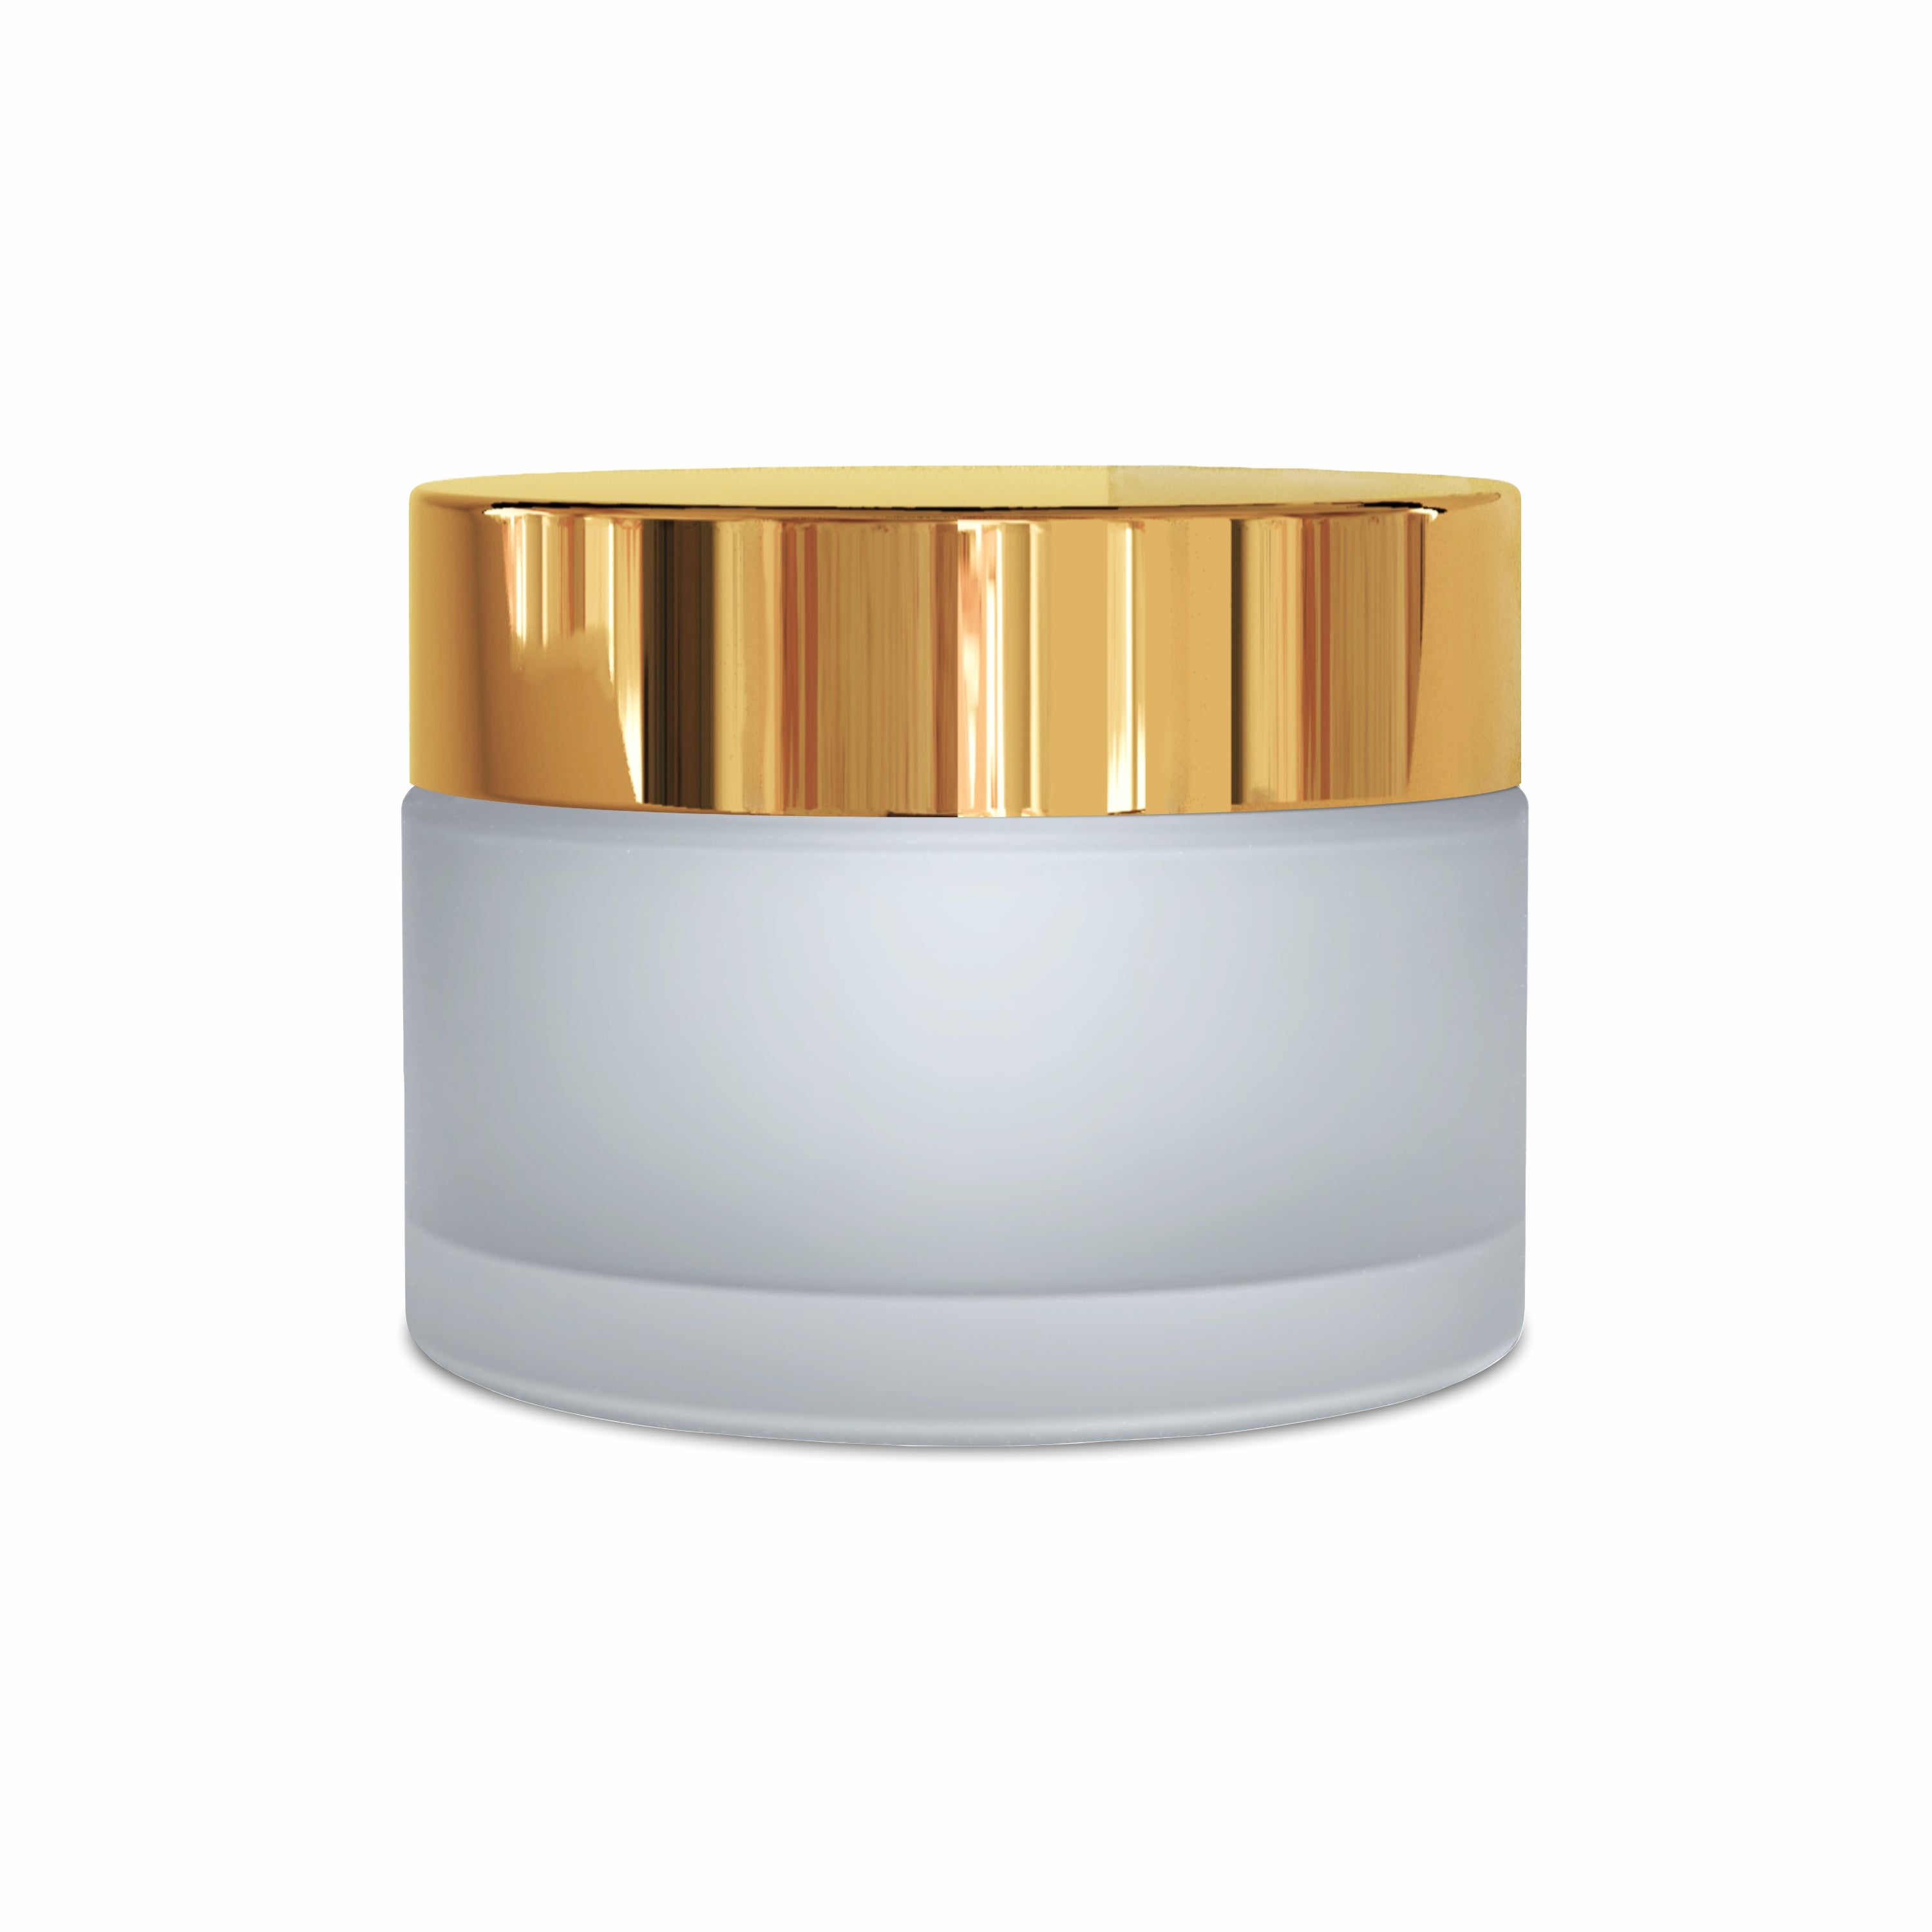 Frosted Jar with Gold Lid For Cream, Scrub, Lip Balm, Body Lotion-50 Gm [ZMJ06]